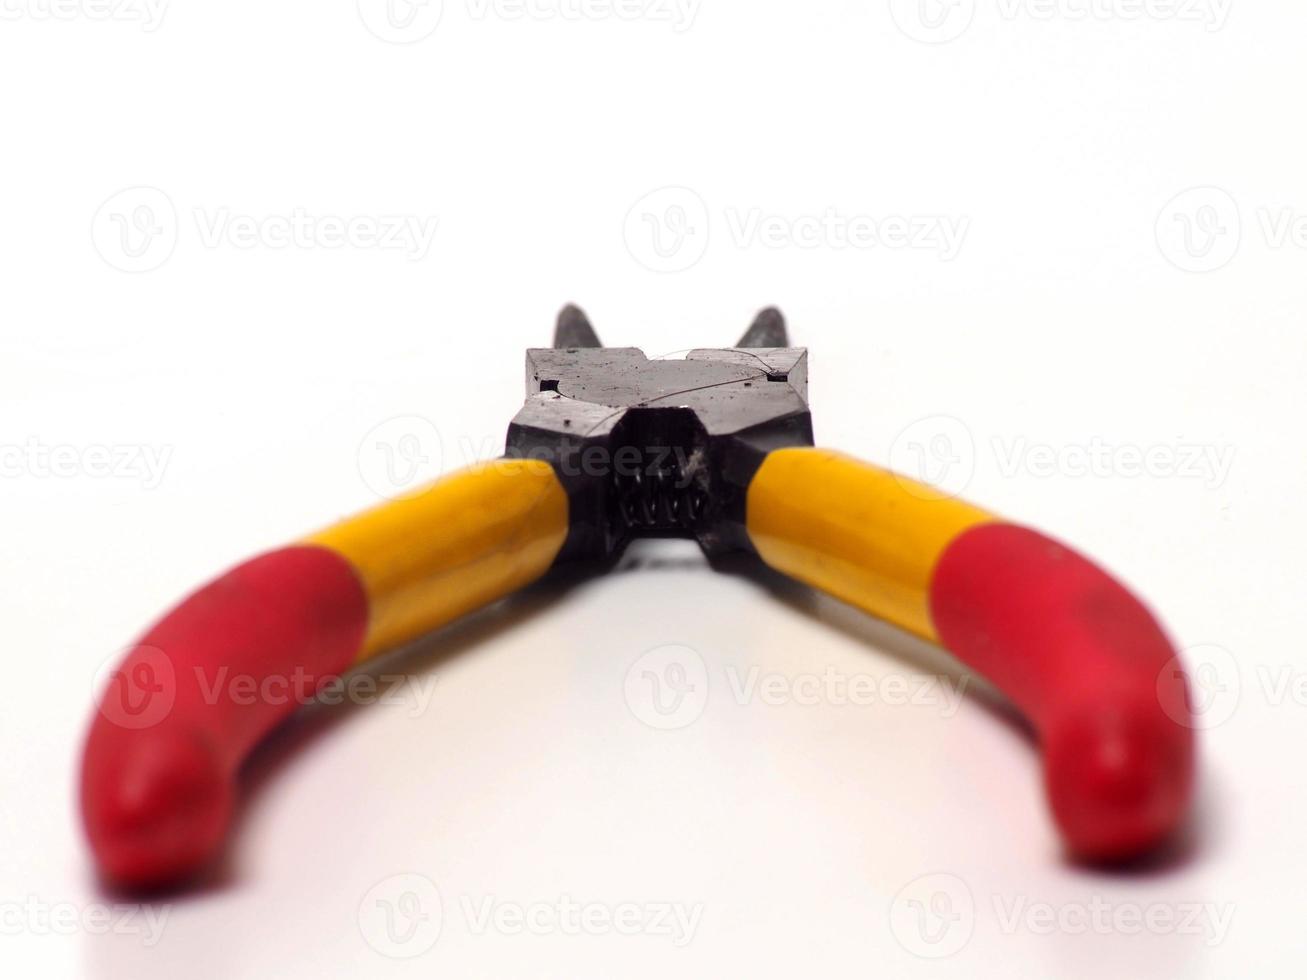 Picture of snap ring plier that has a yellow - red handle photo